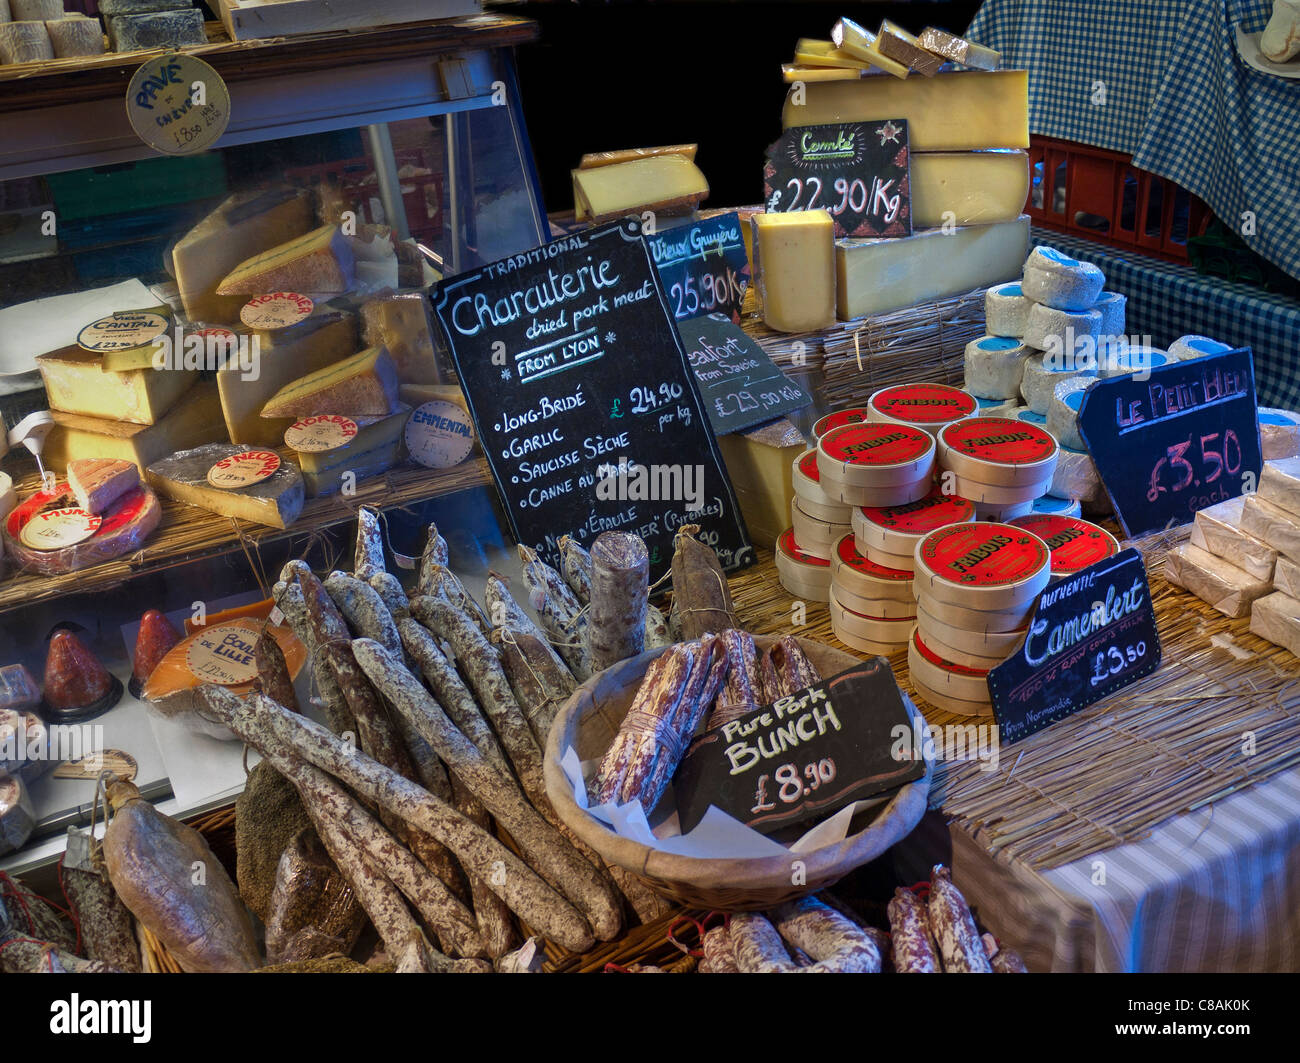 Authentic French cheese and meats stall in Borough Market London UK Stock Photo